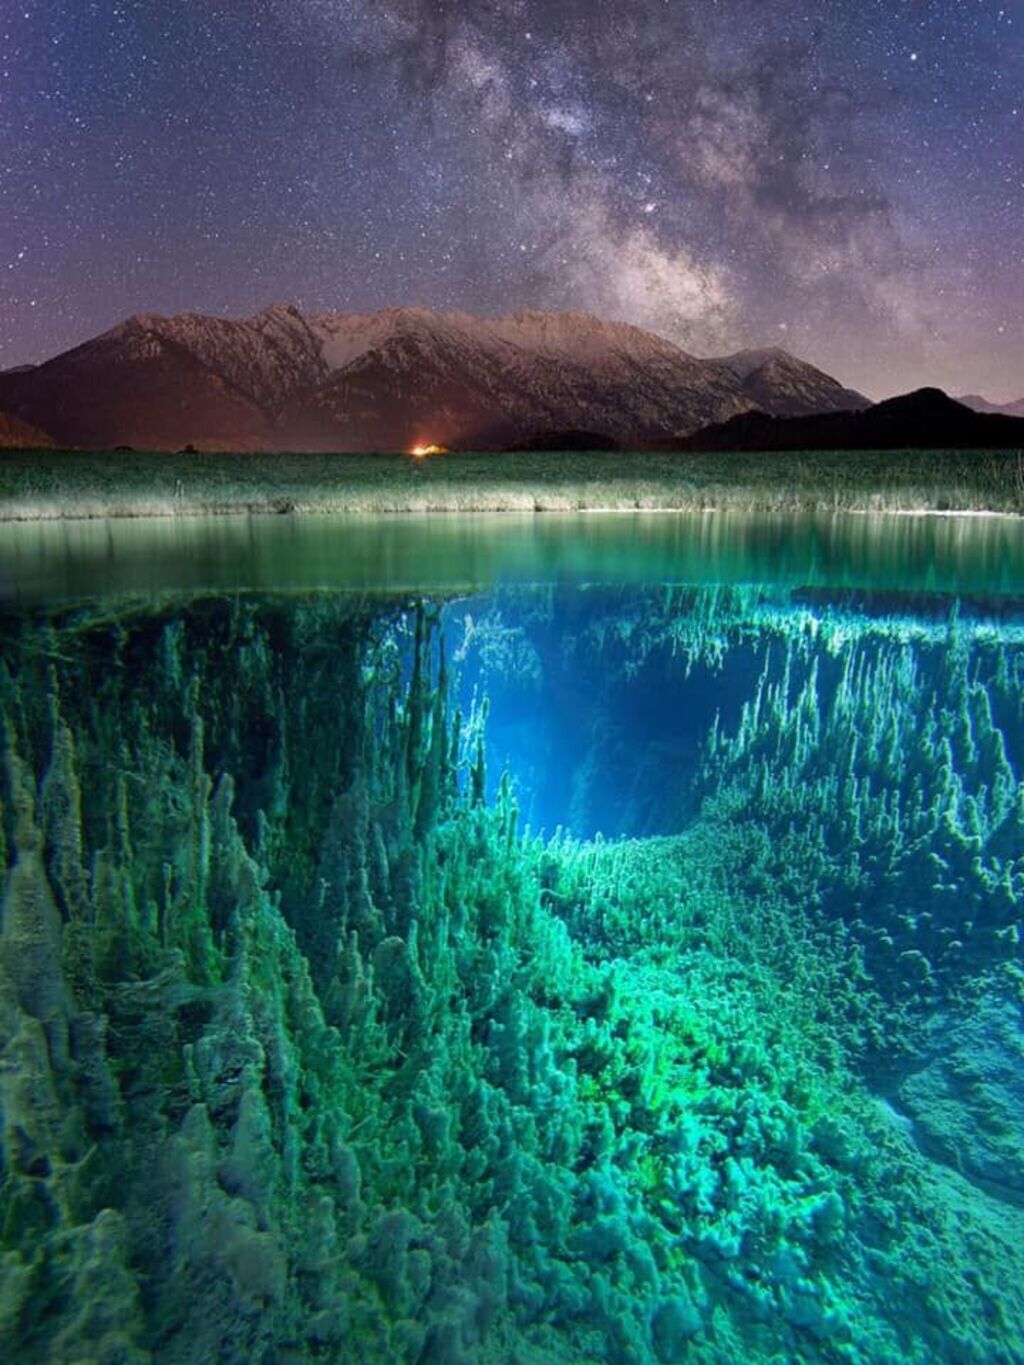 Beautiful image depicting the sky and the terrain underwater